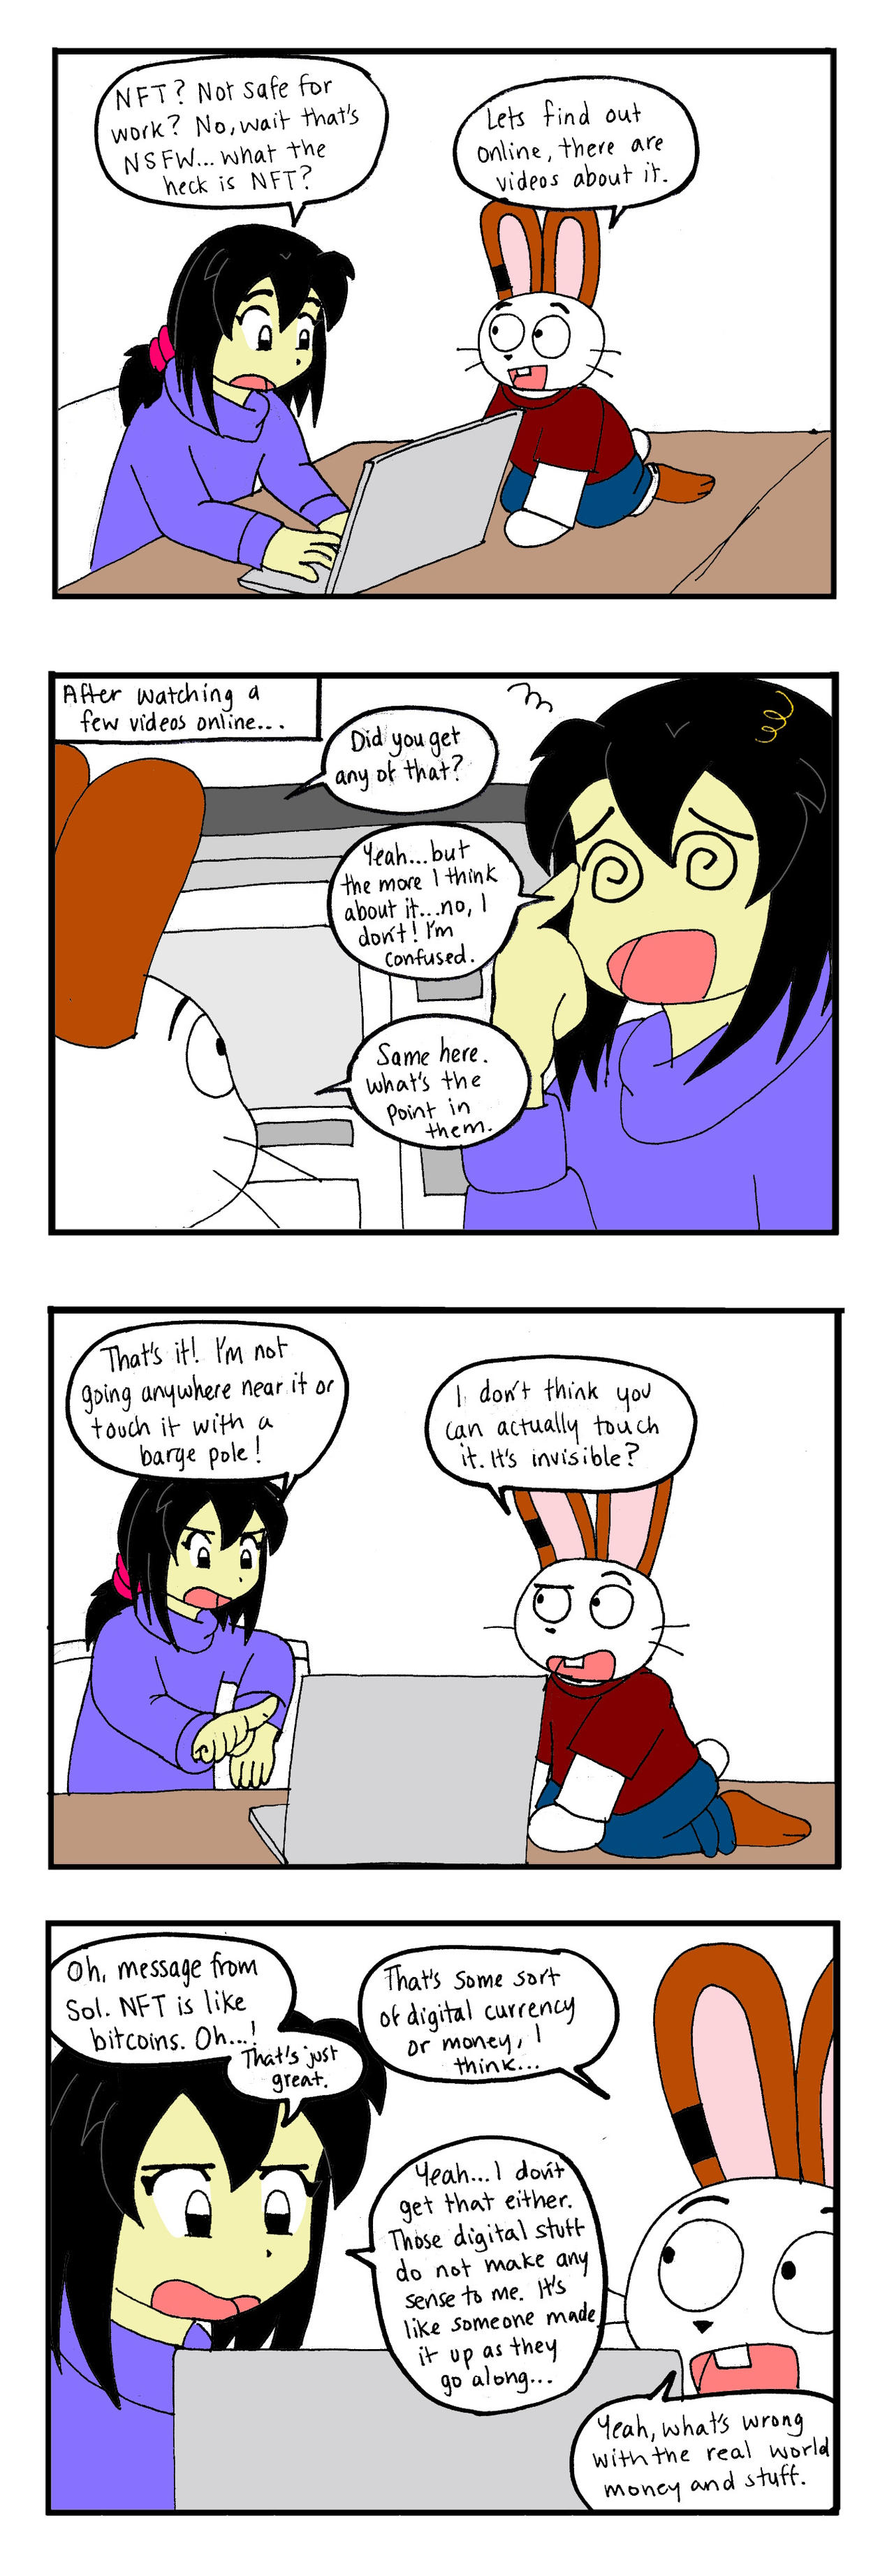 Not Safe For Work Comic Day to day life: NFT...? by petite-berry on DeviantArt